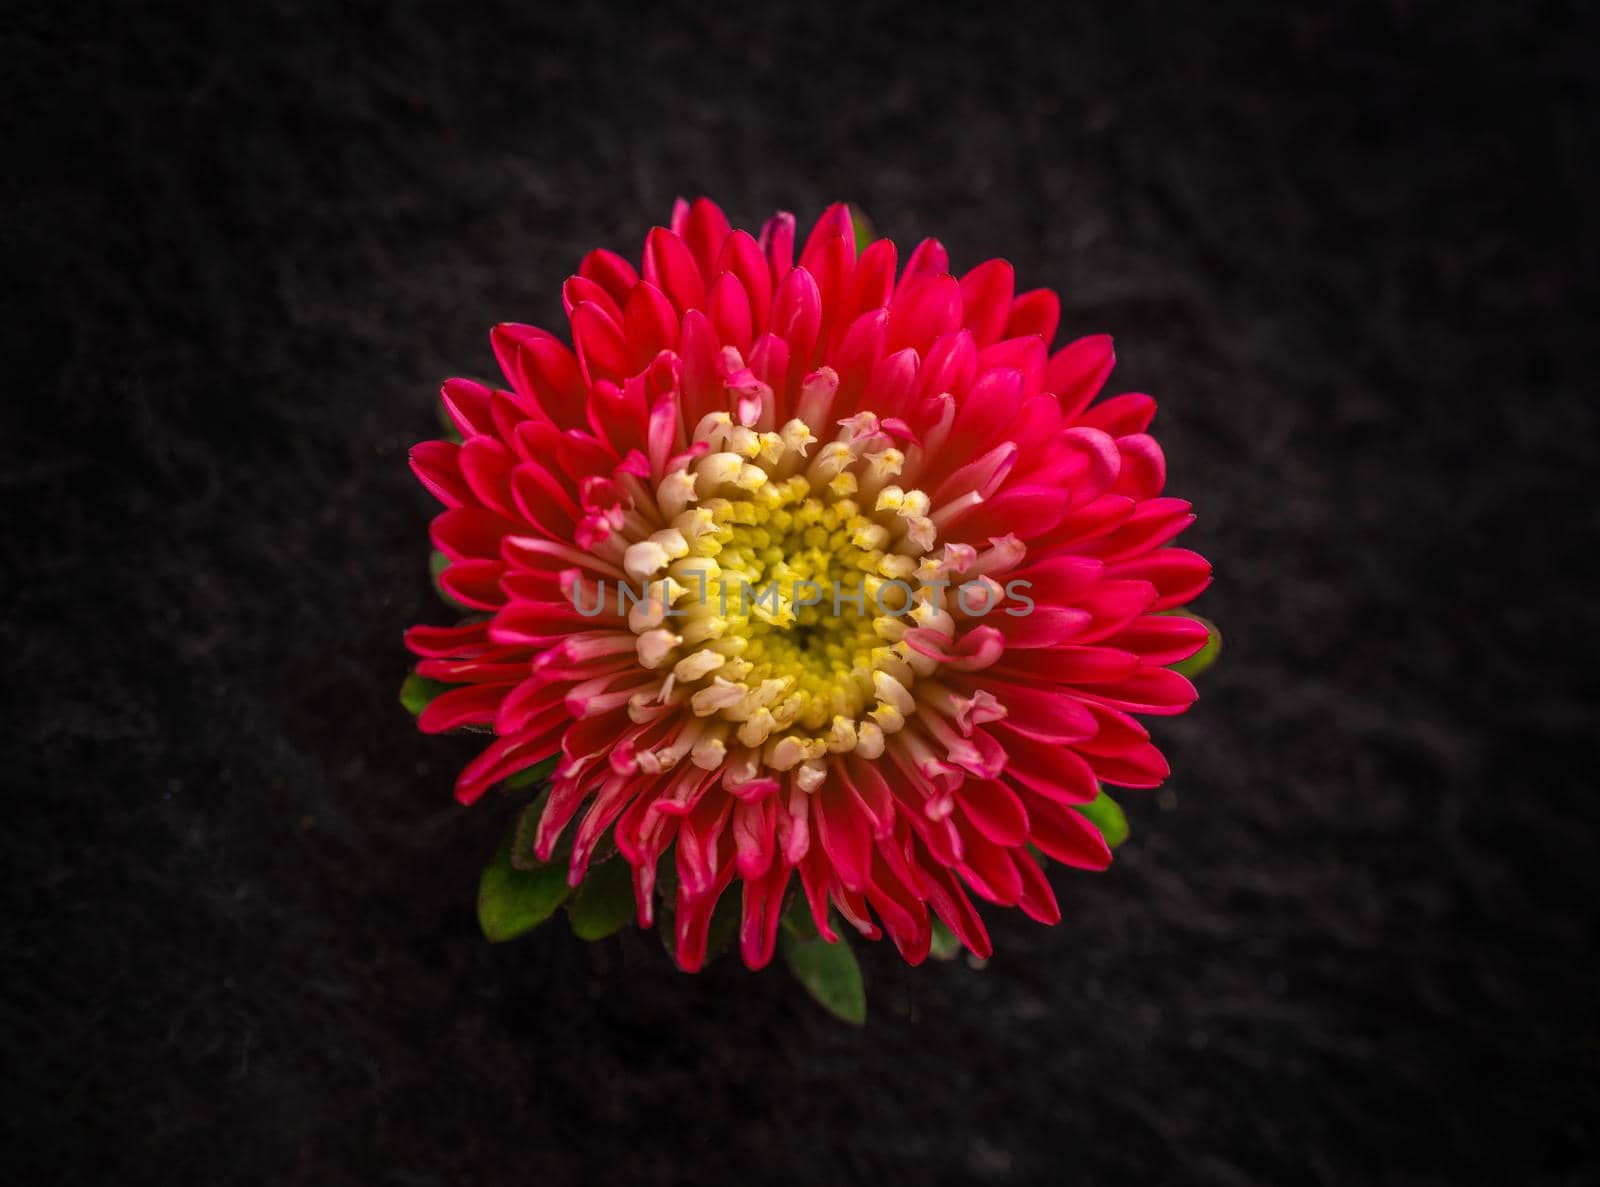 Delicate flower on a black background. Studio shot. by Proff